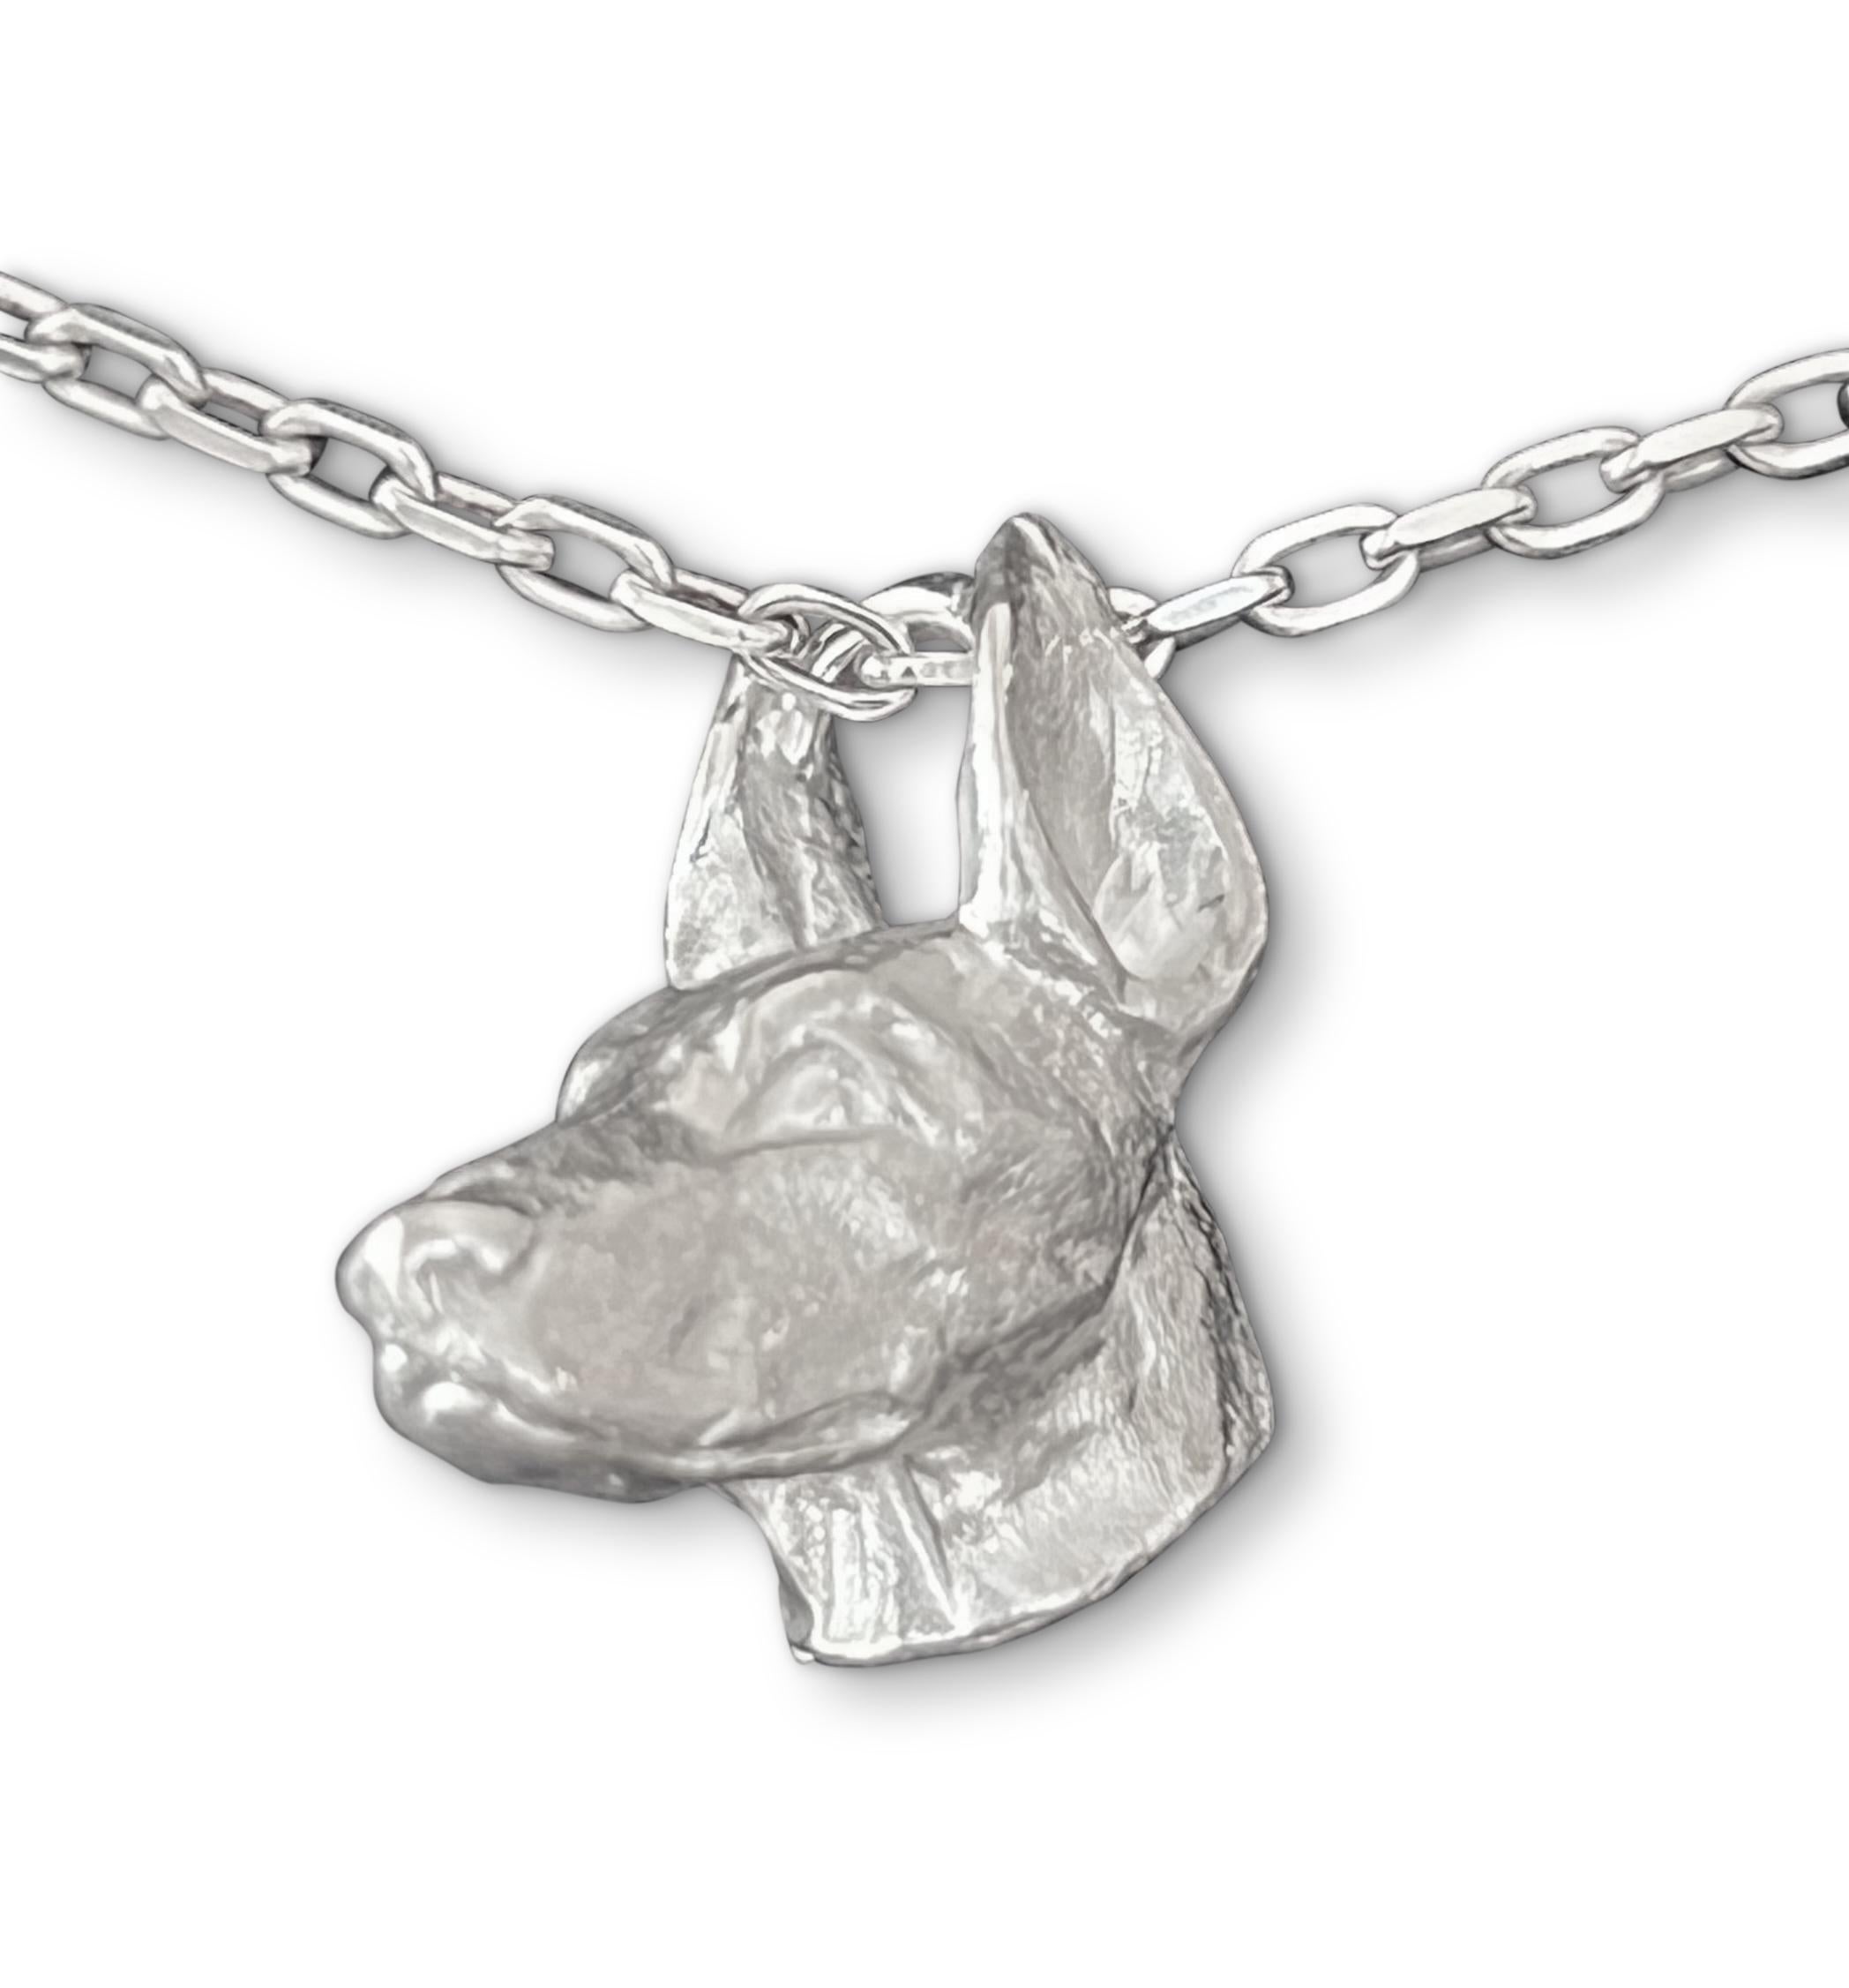 Discover the exquisite art of England’s renowned miniature wildlife sculptor, PAUL EATON, with his sculpted sterling silver Doberman dog charm or pendant.    Each bespoke animal pendant is meticulously carved, individually cast, and carefully